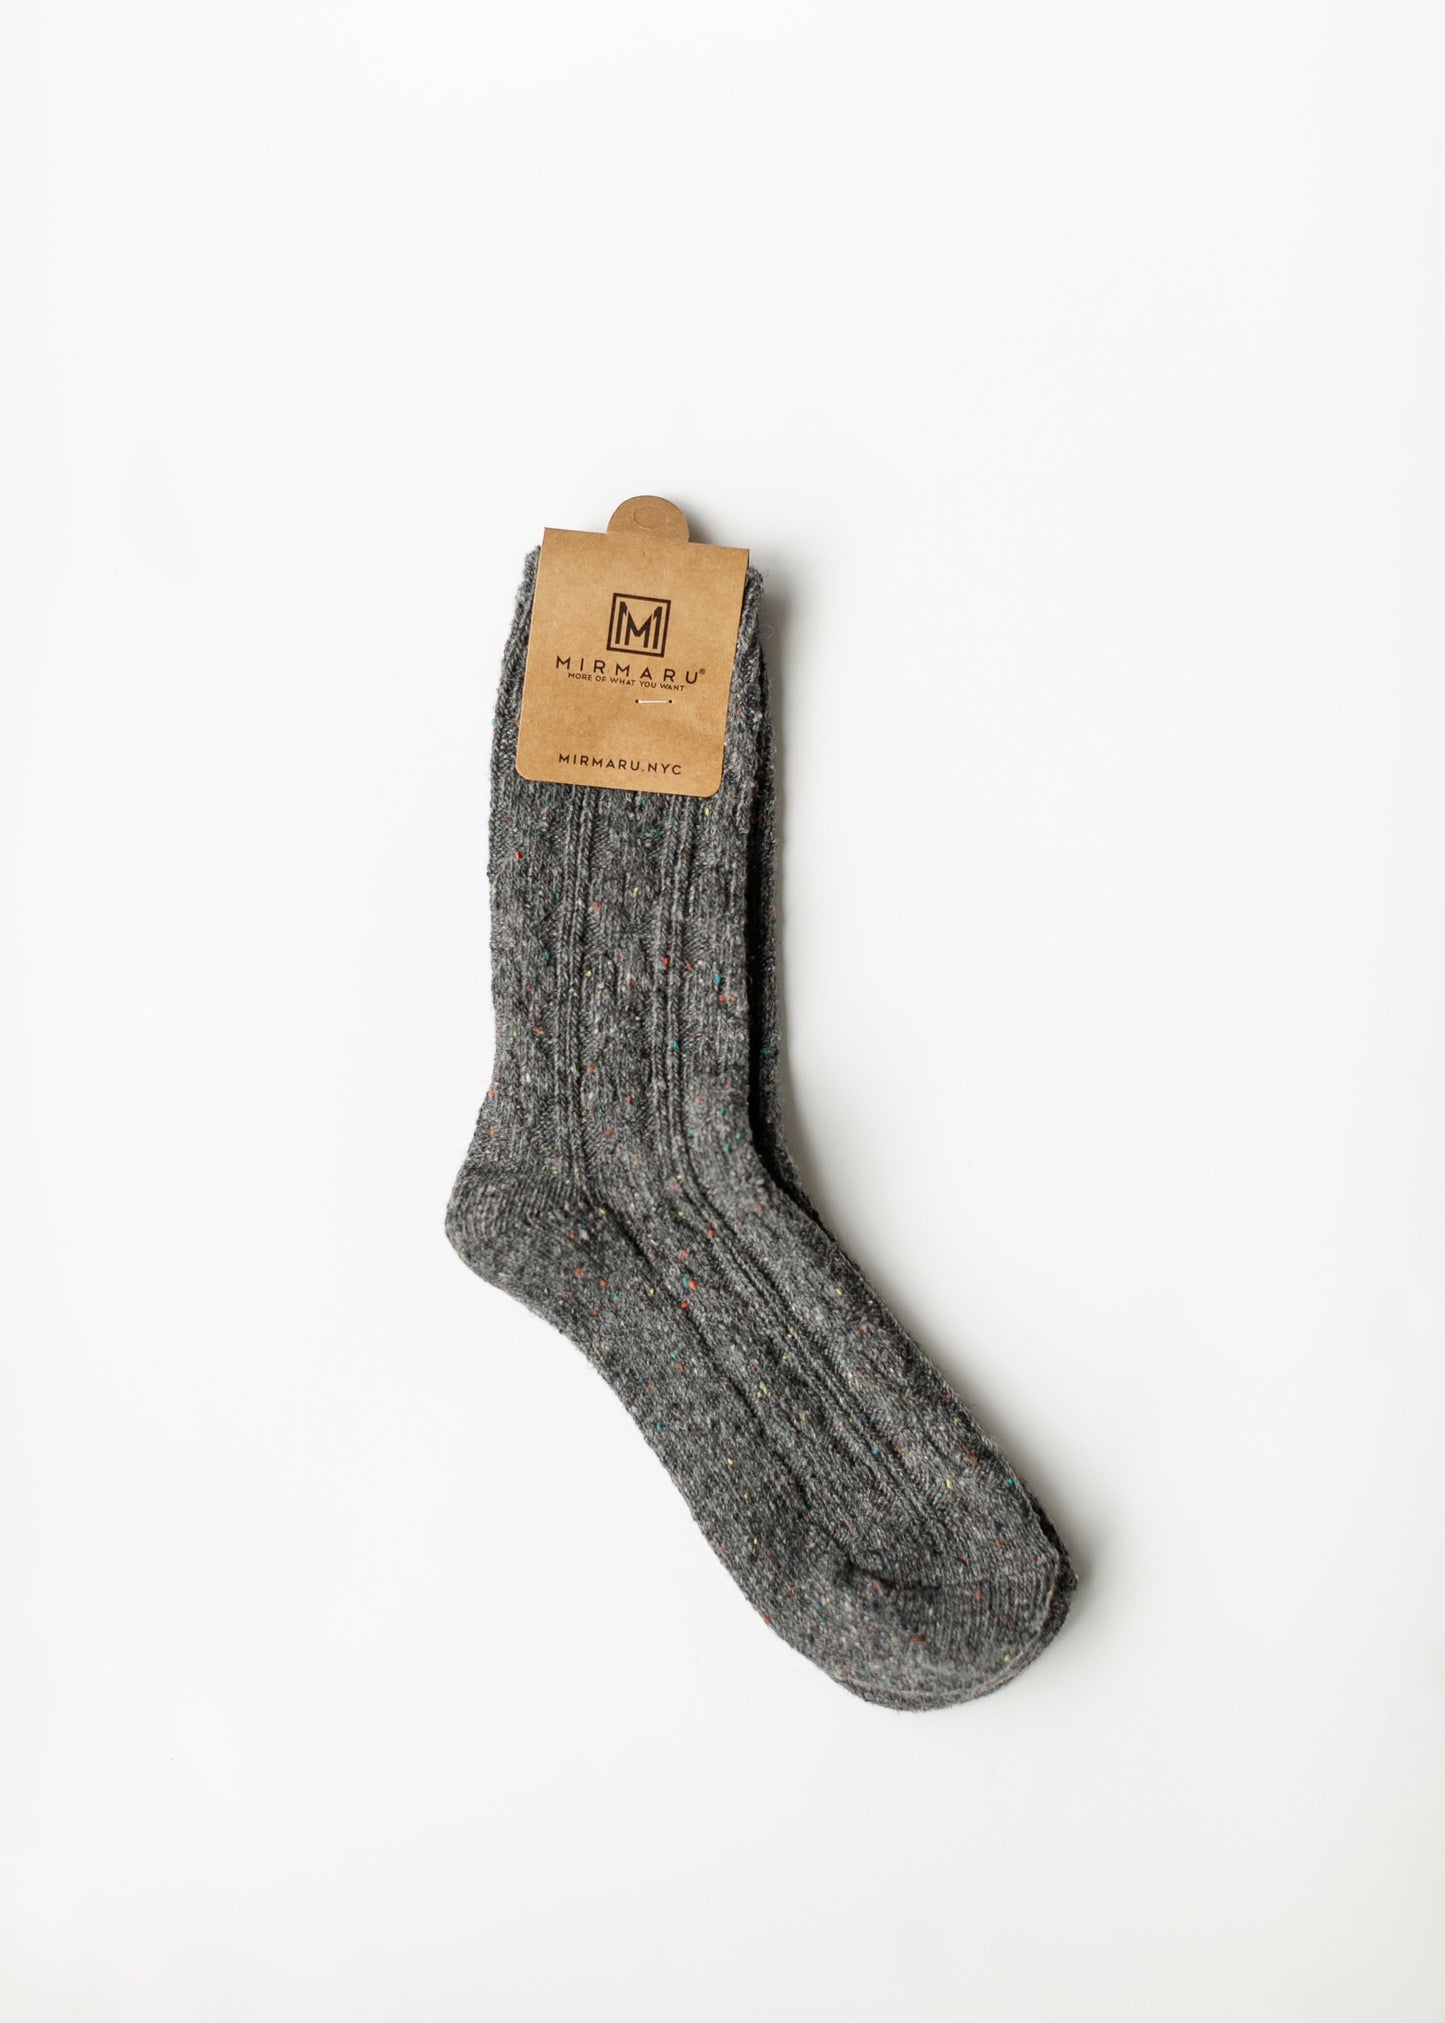 Wool Blend Crew Length Socks Accessories Speckled / Gray